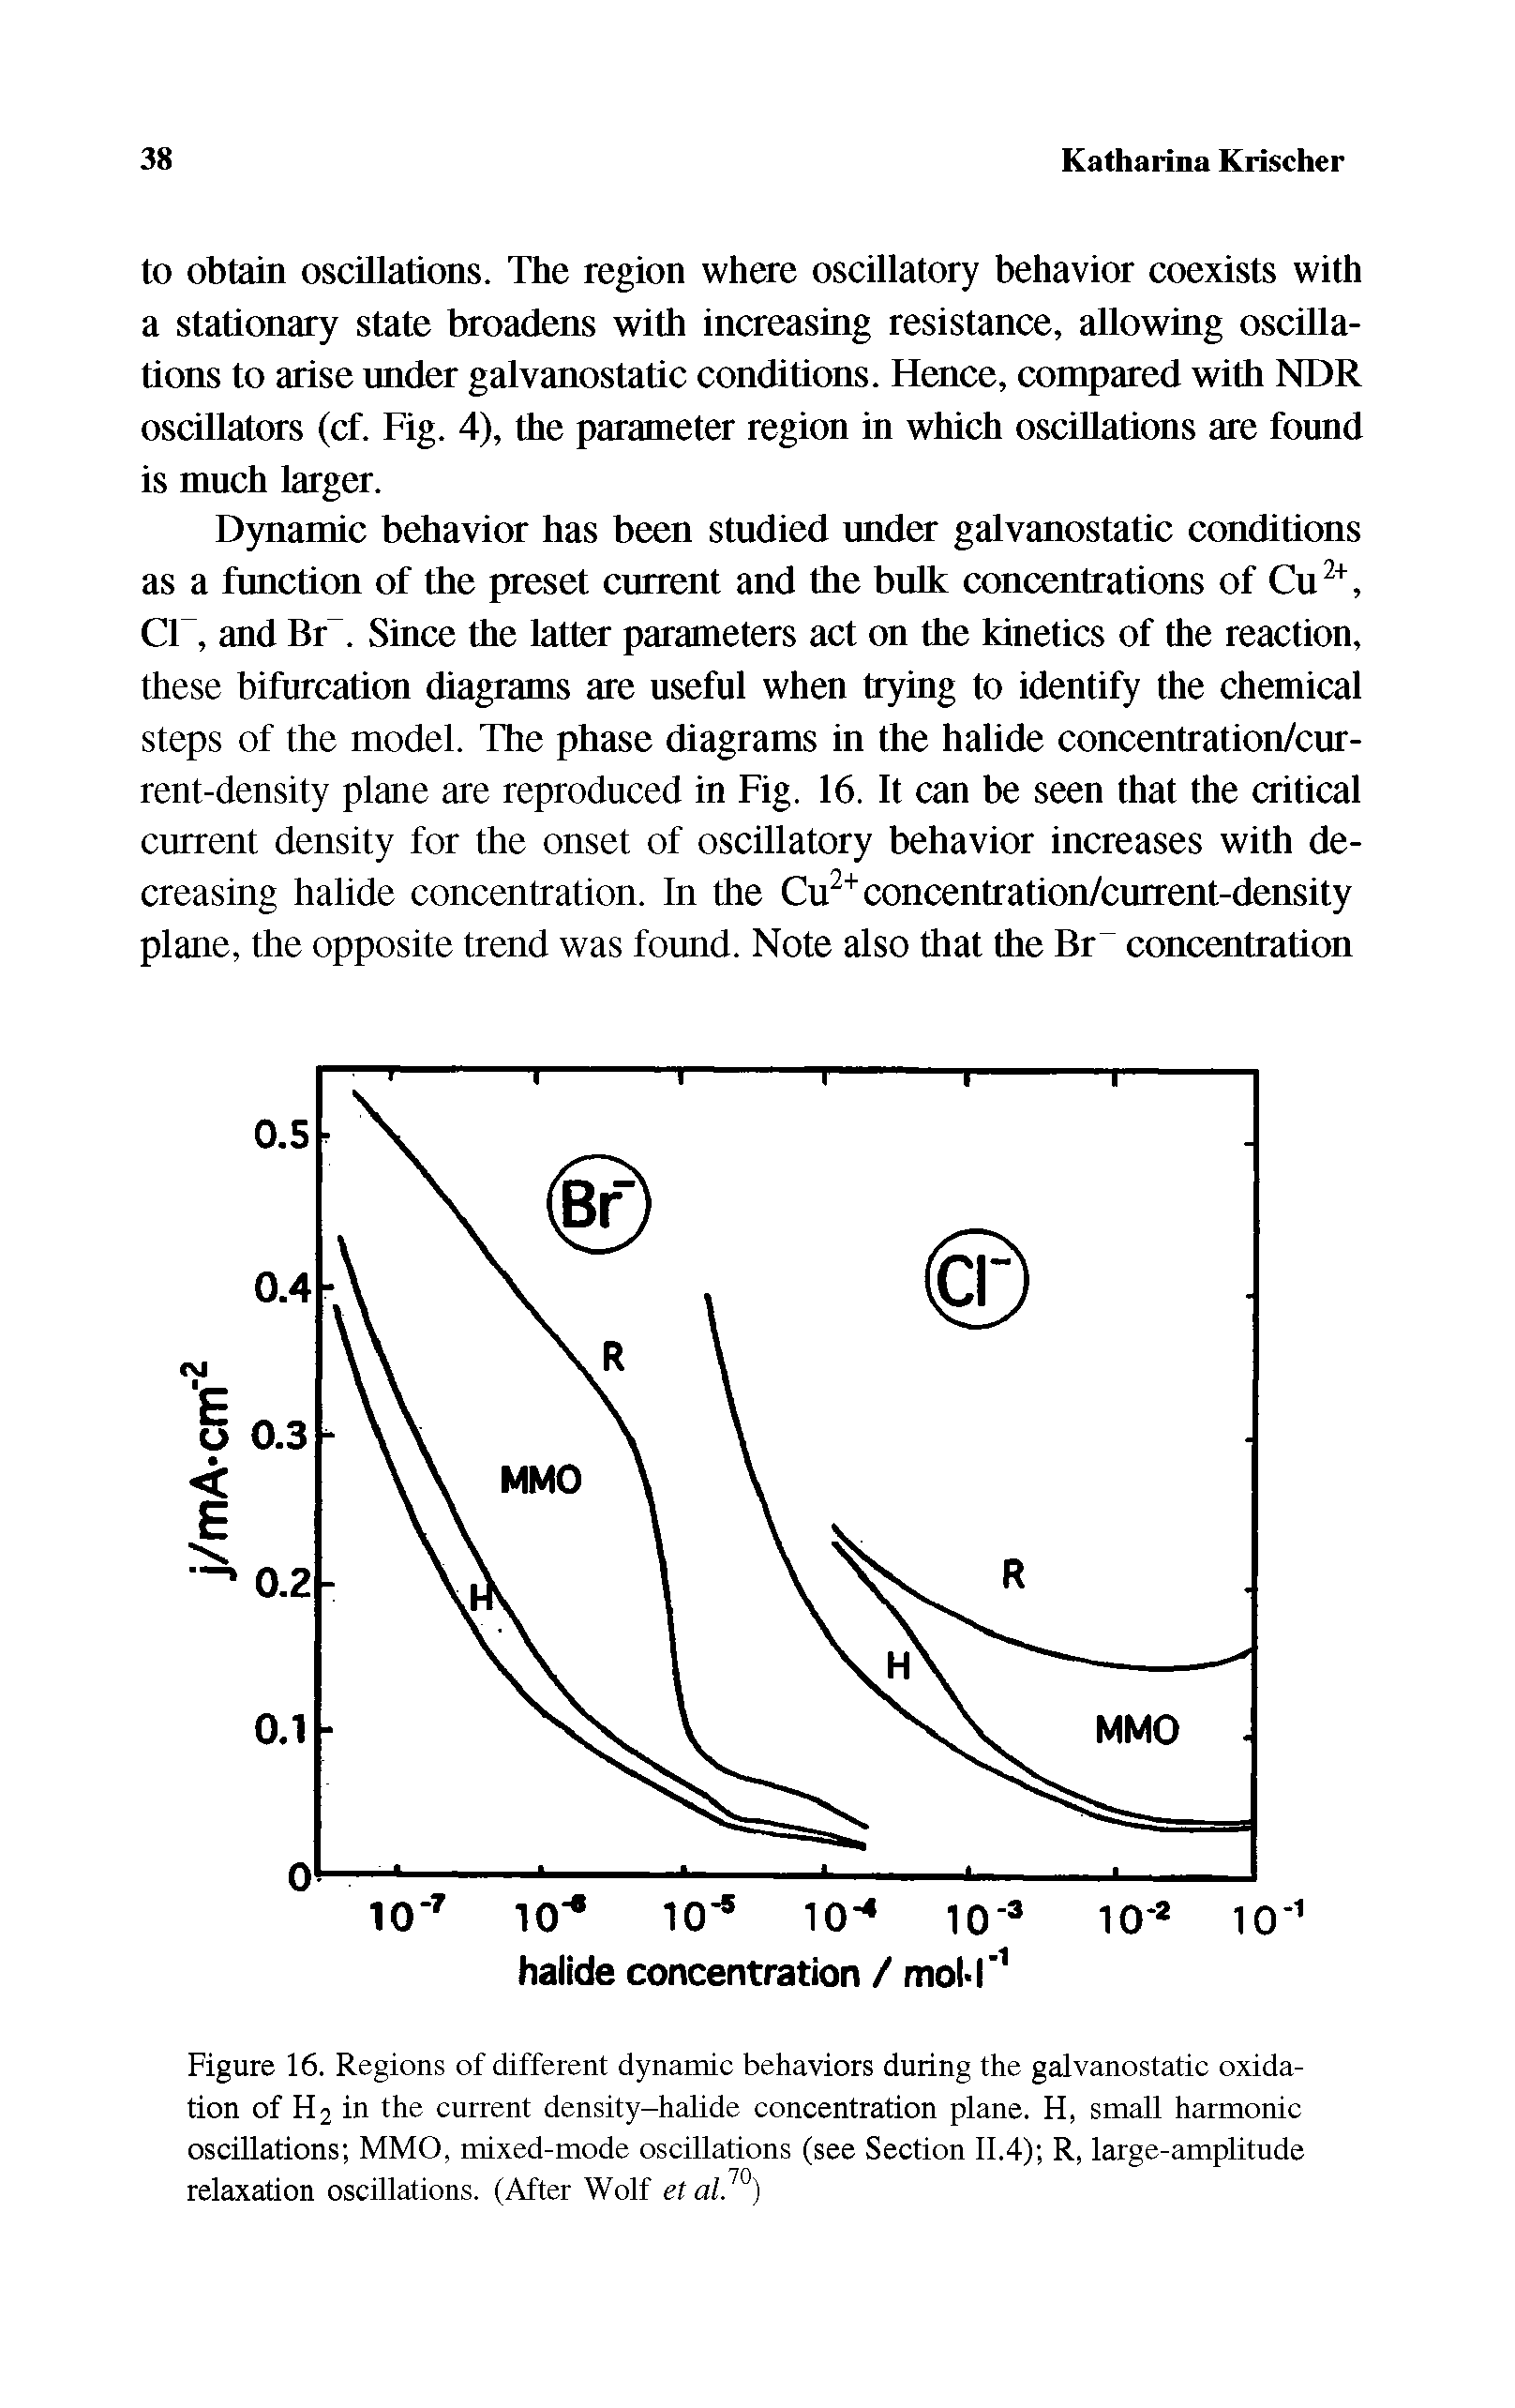 Figure 16. Regions of different dynamic behaviors during the galvanostatic oxidation of H 2 in the current density-halide concentration plane. H, small harmonic oscillations MMO, mixed-mode oscillations (see Section 11.4) R, large-amplitude relaxation oscillations. (After Wolf etalJ )...